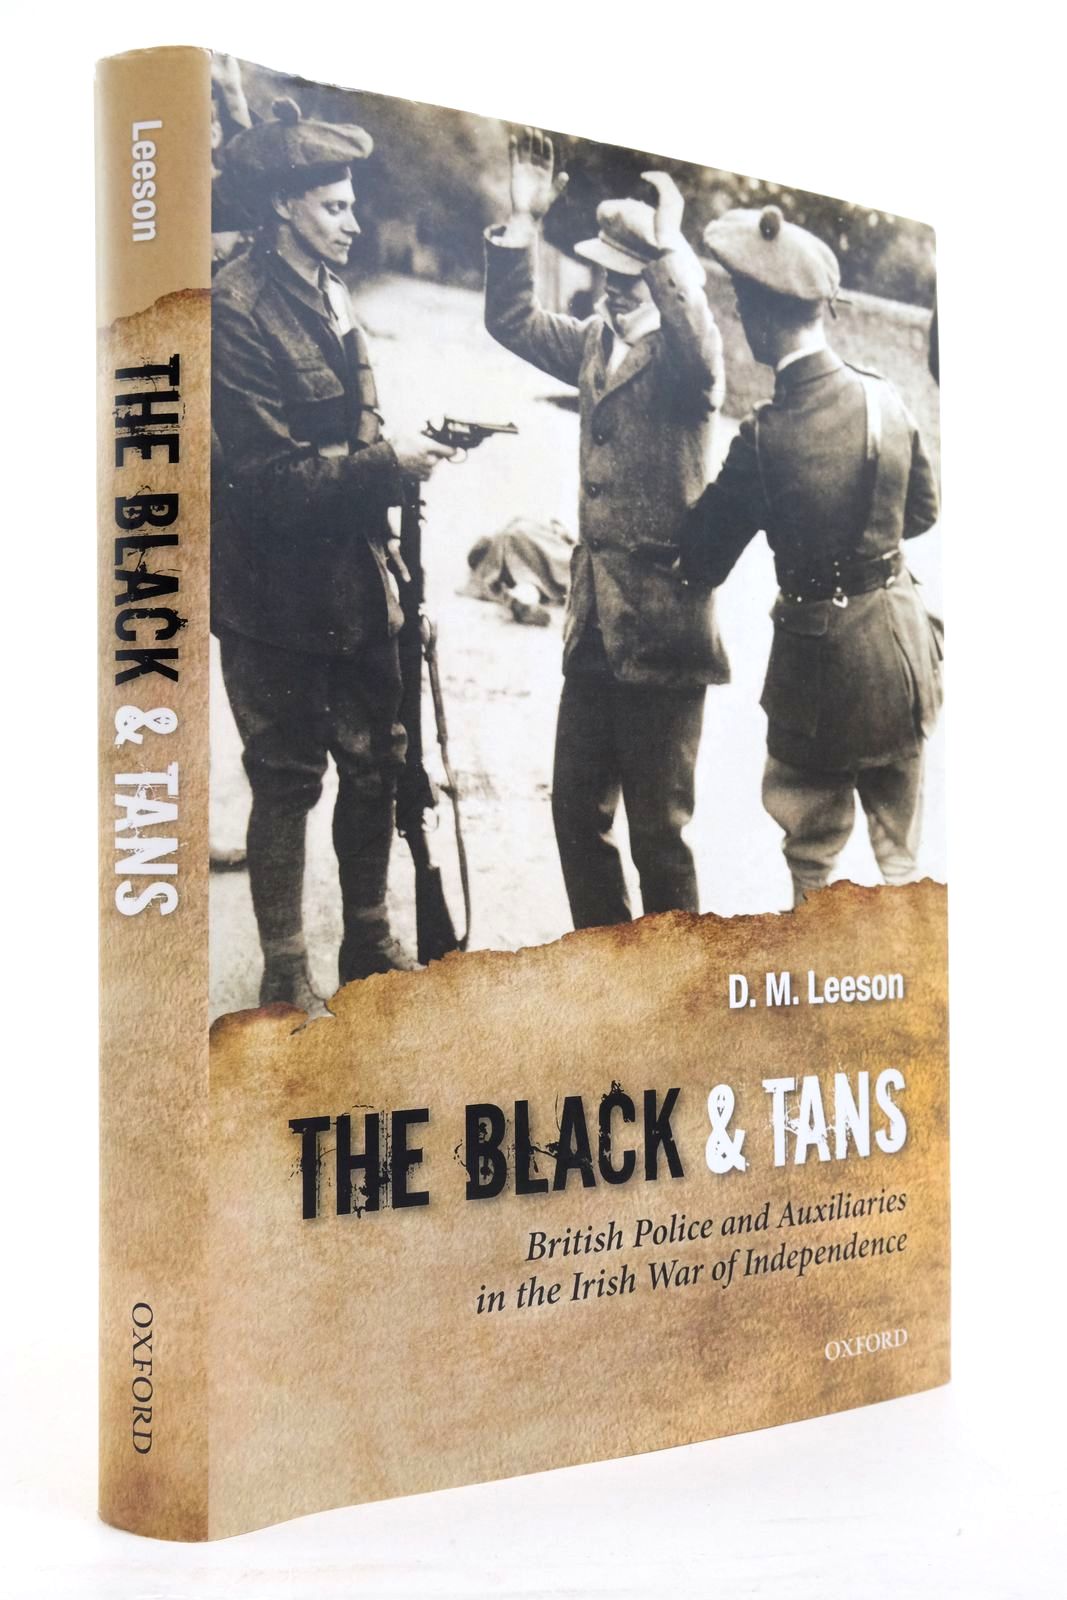 Photo of THE BLACK AND TANS: BRITISH POLICE AND AUXILIARIES IN THE IRISH WAR OF INDEPENDENCE, 1920-1921 written by Leeson, D.M. published by Oxford University Press (STOCK CODE: 2138095)  for sale by Stella & Rose's Books